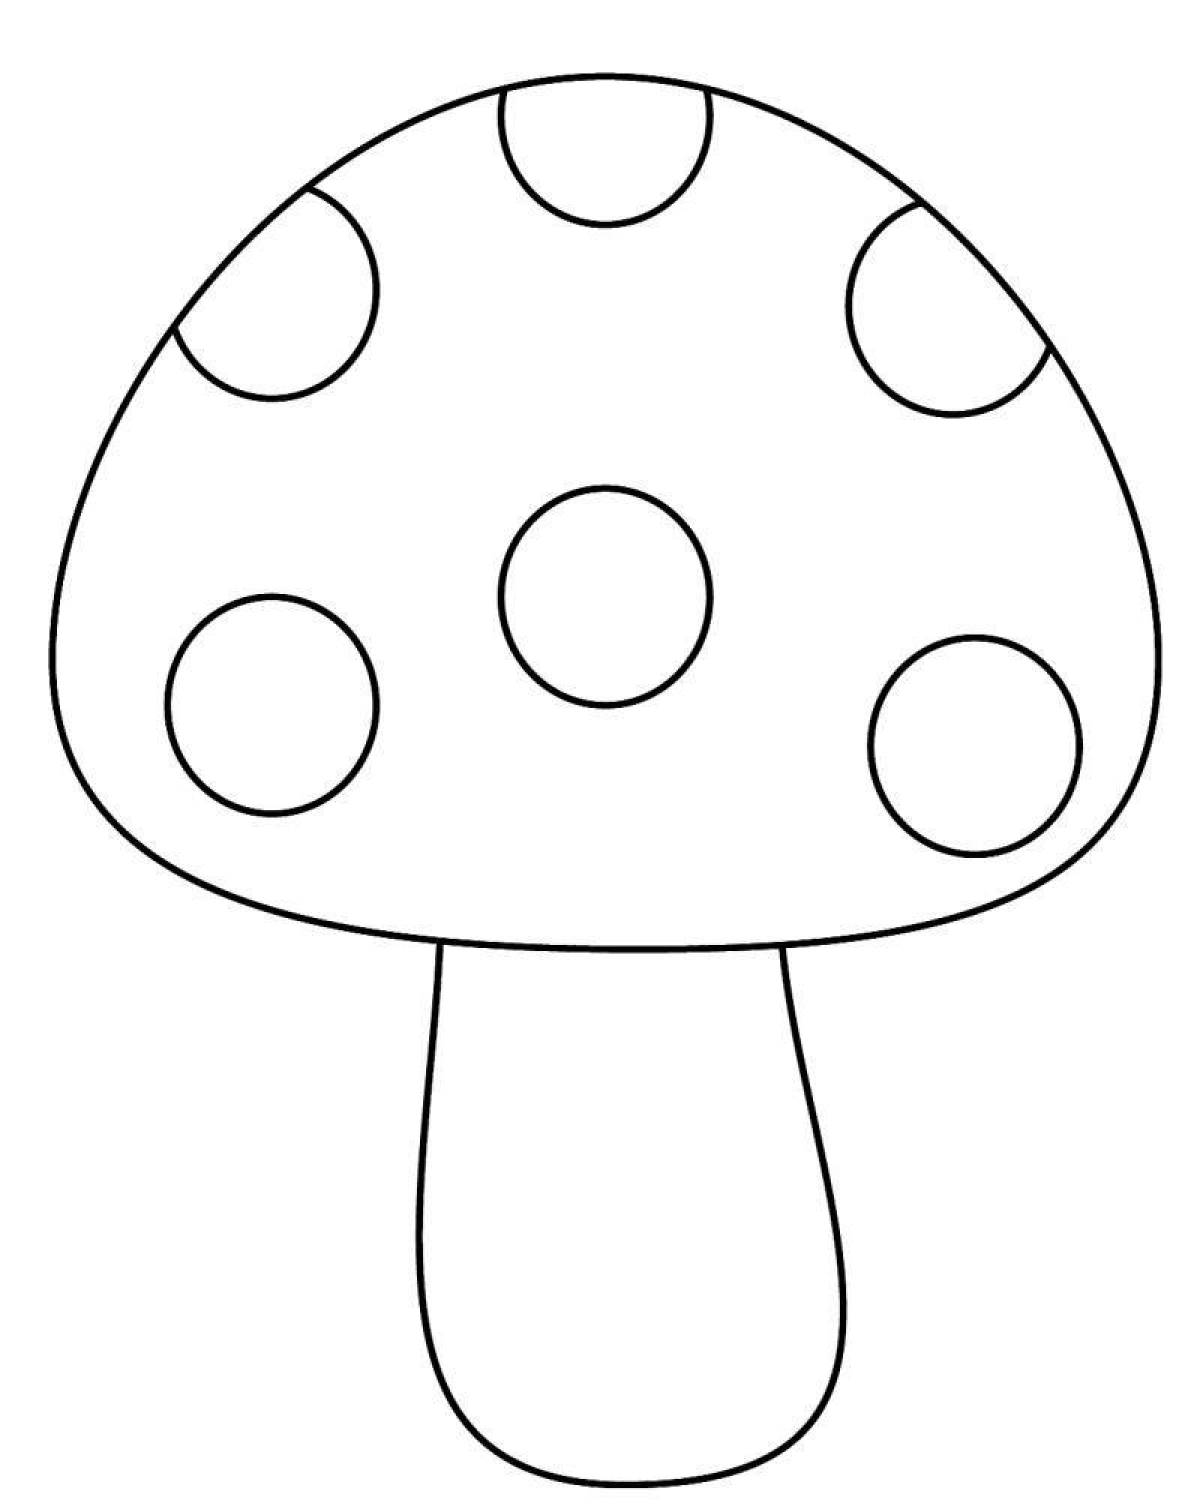 Funny fly agaric coloring pages for kids